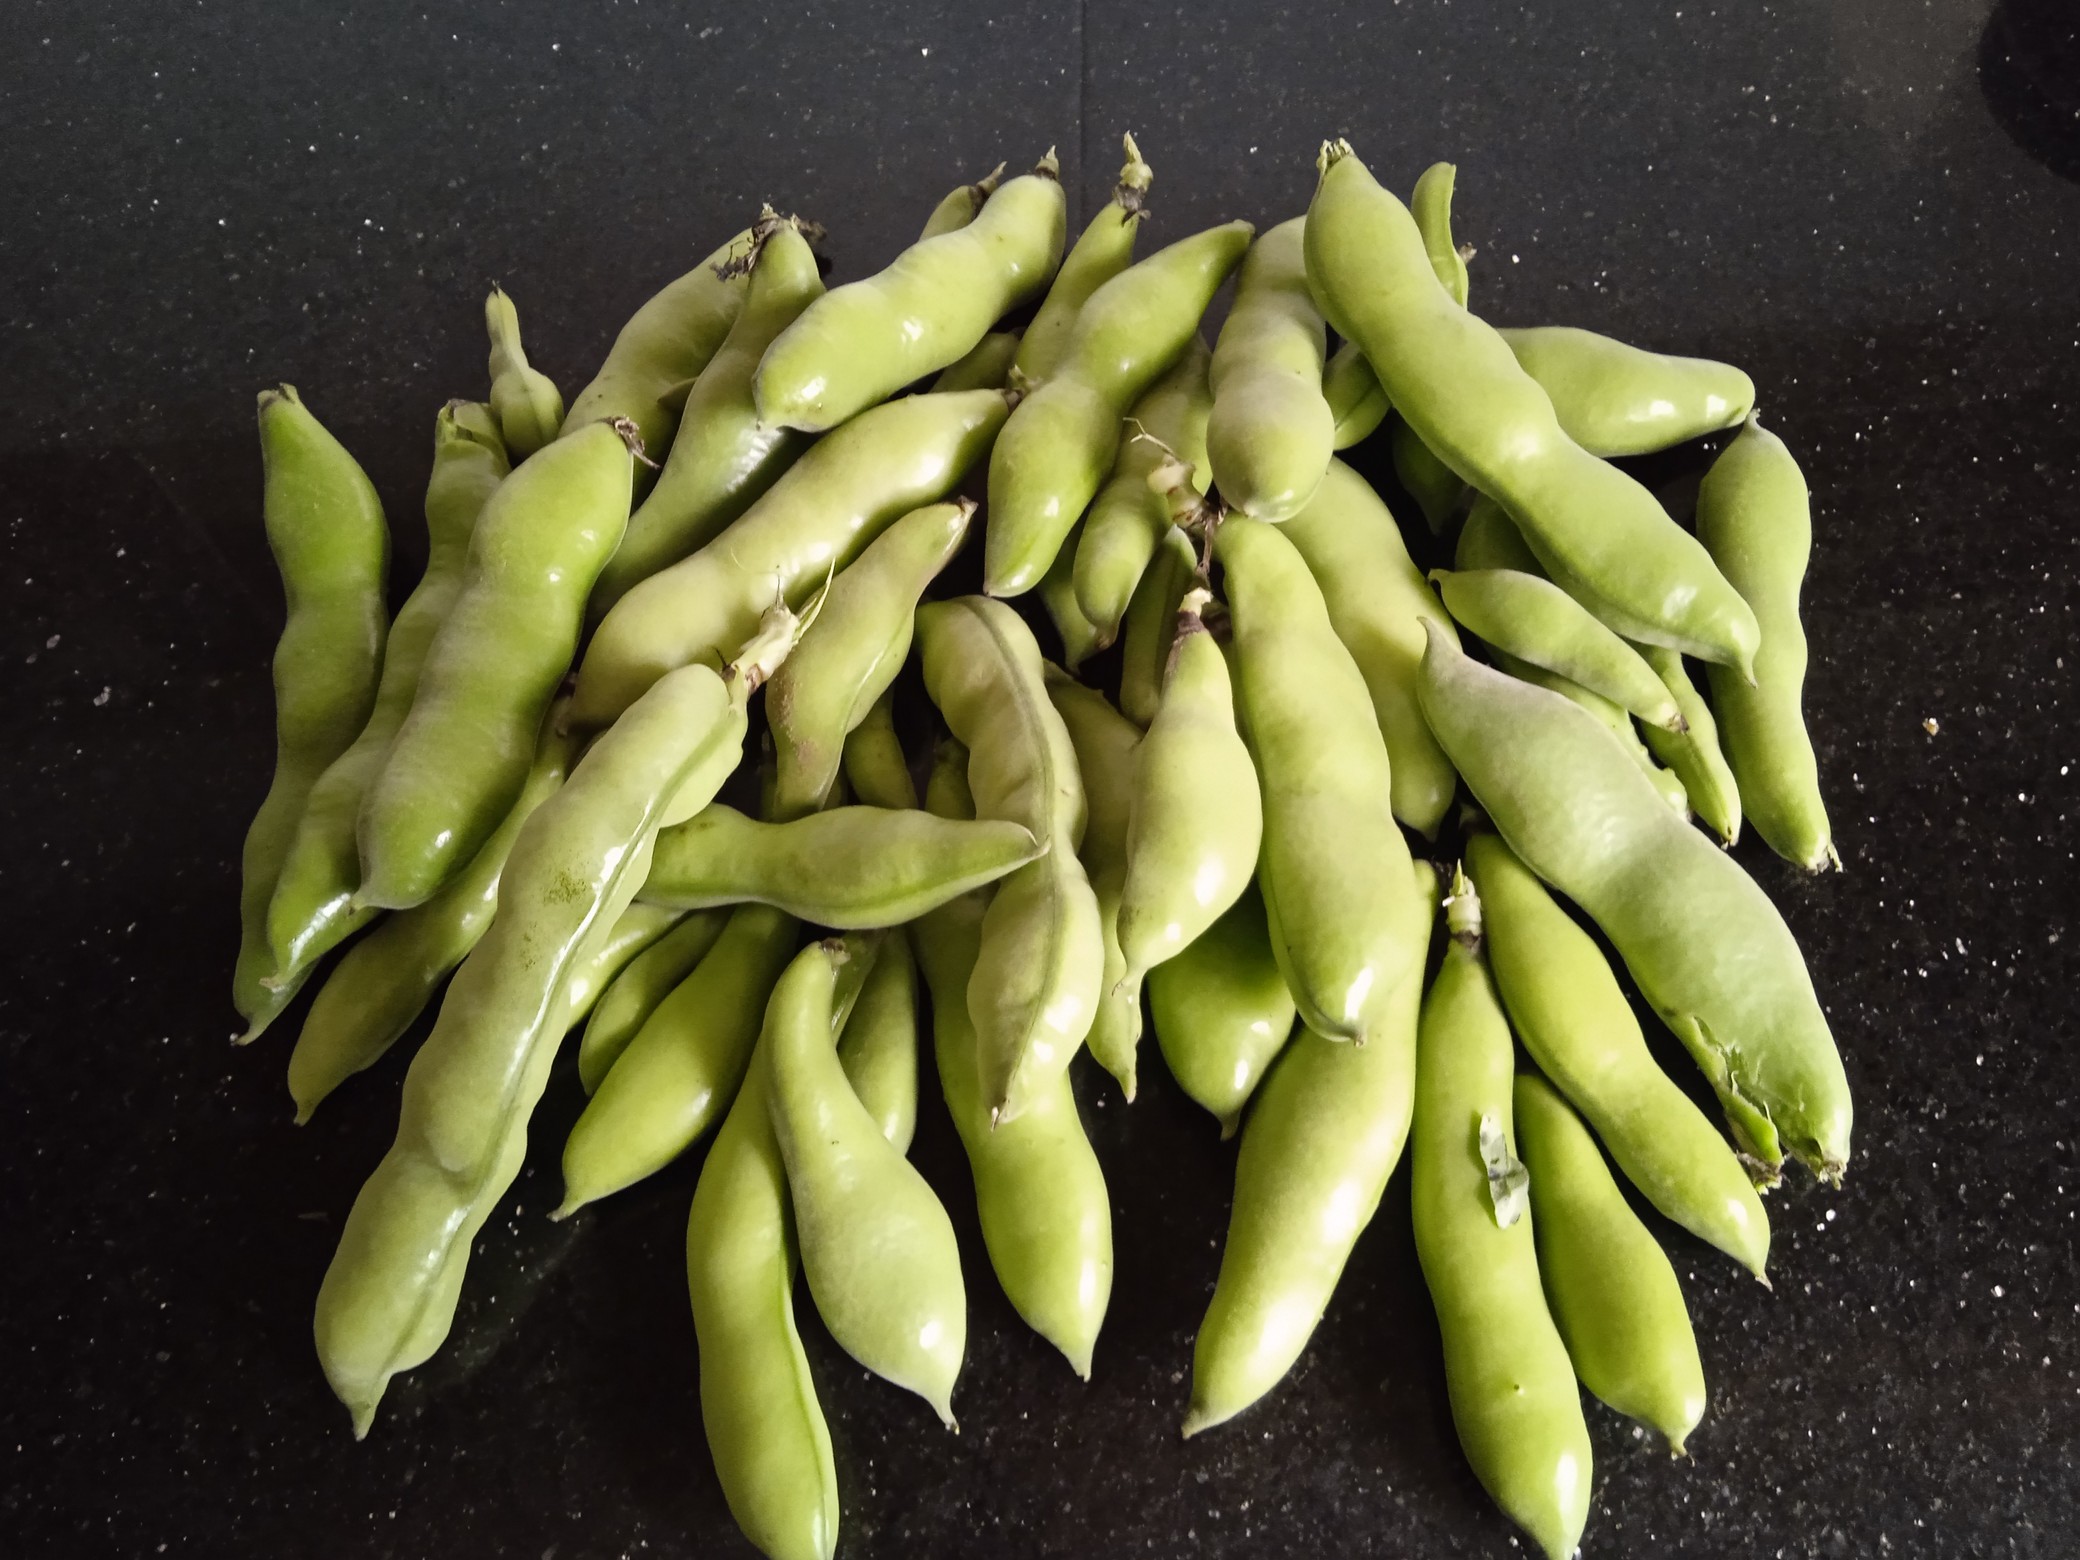 Broad beans will be ready for picking about 3-4 months after sowing. When the beans begin to show through the pods, then it is time to pick them.